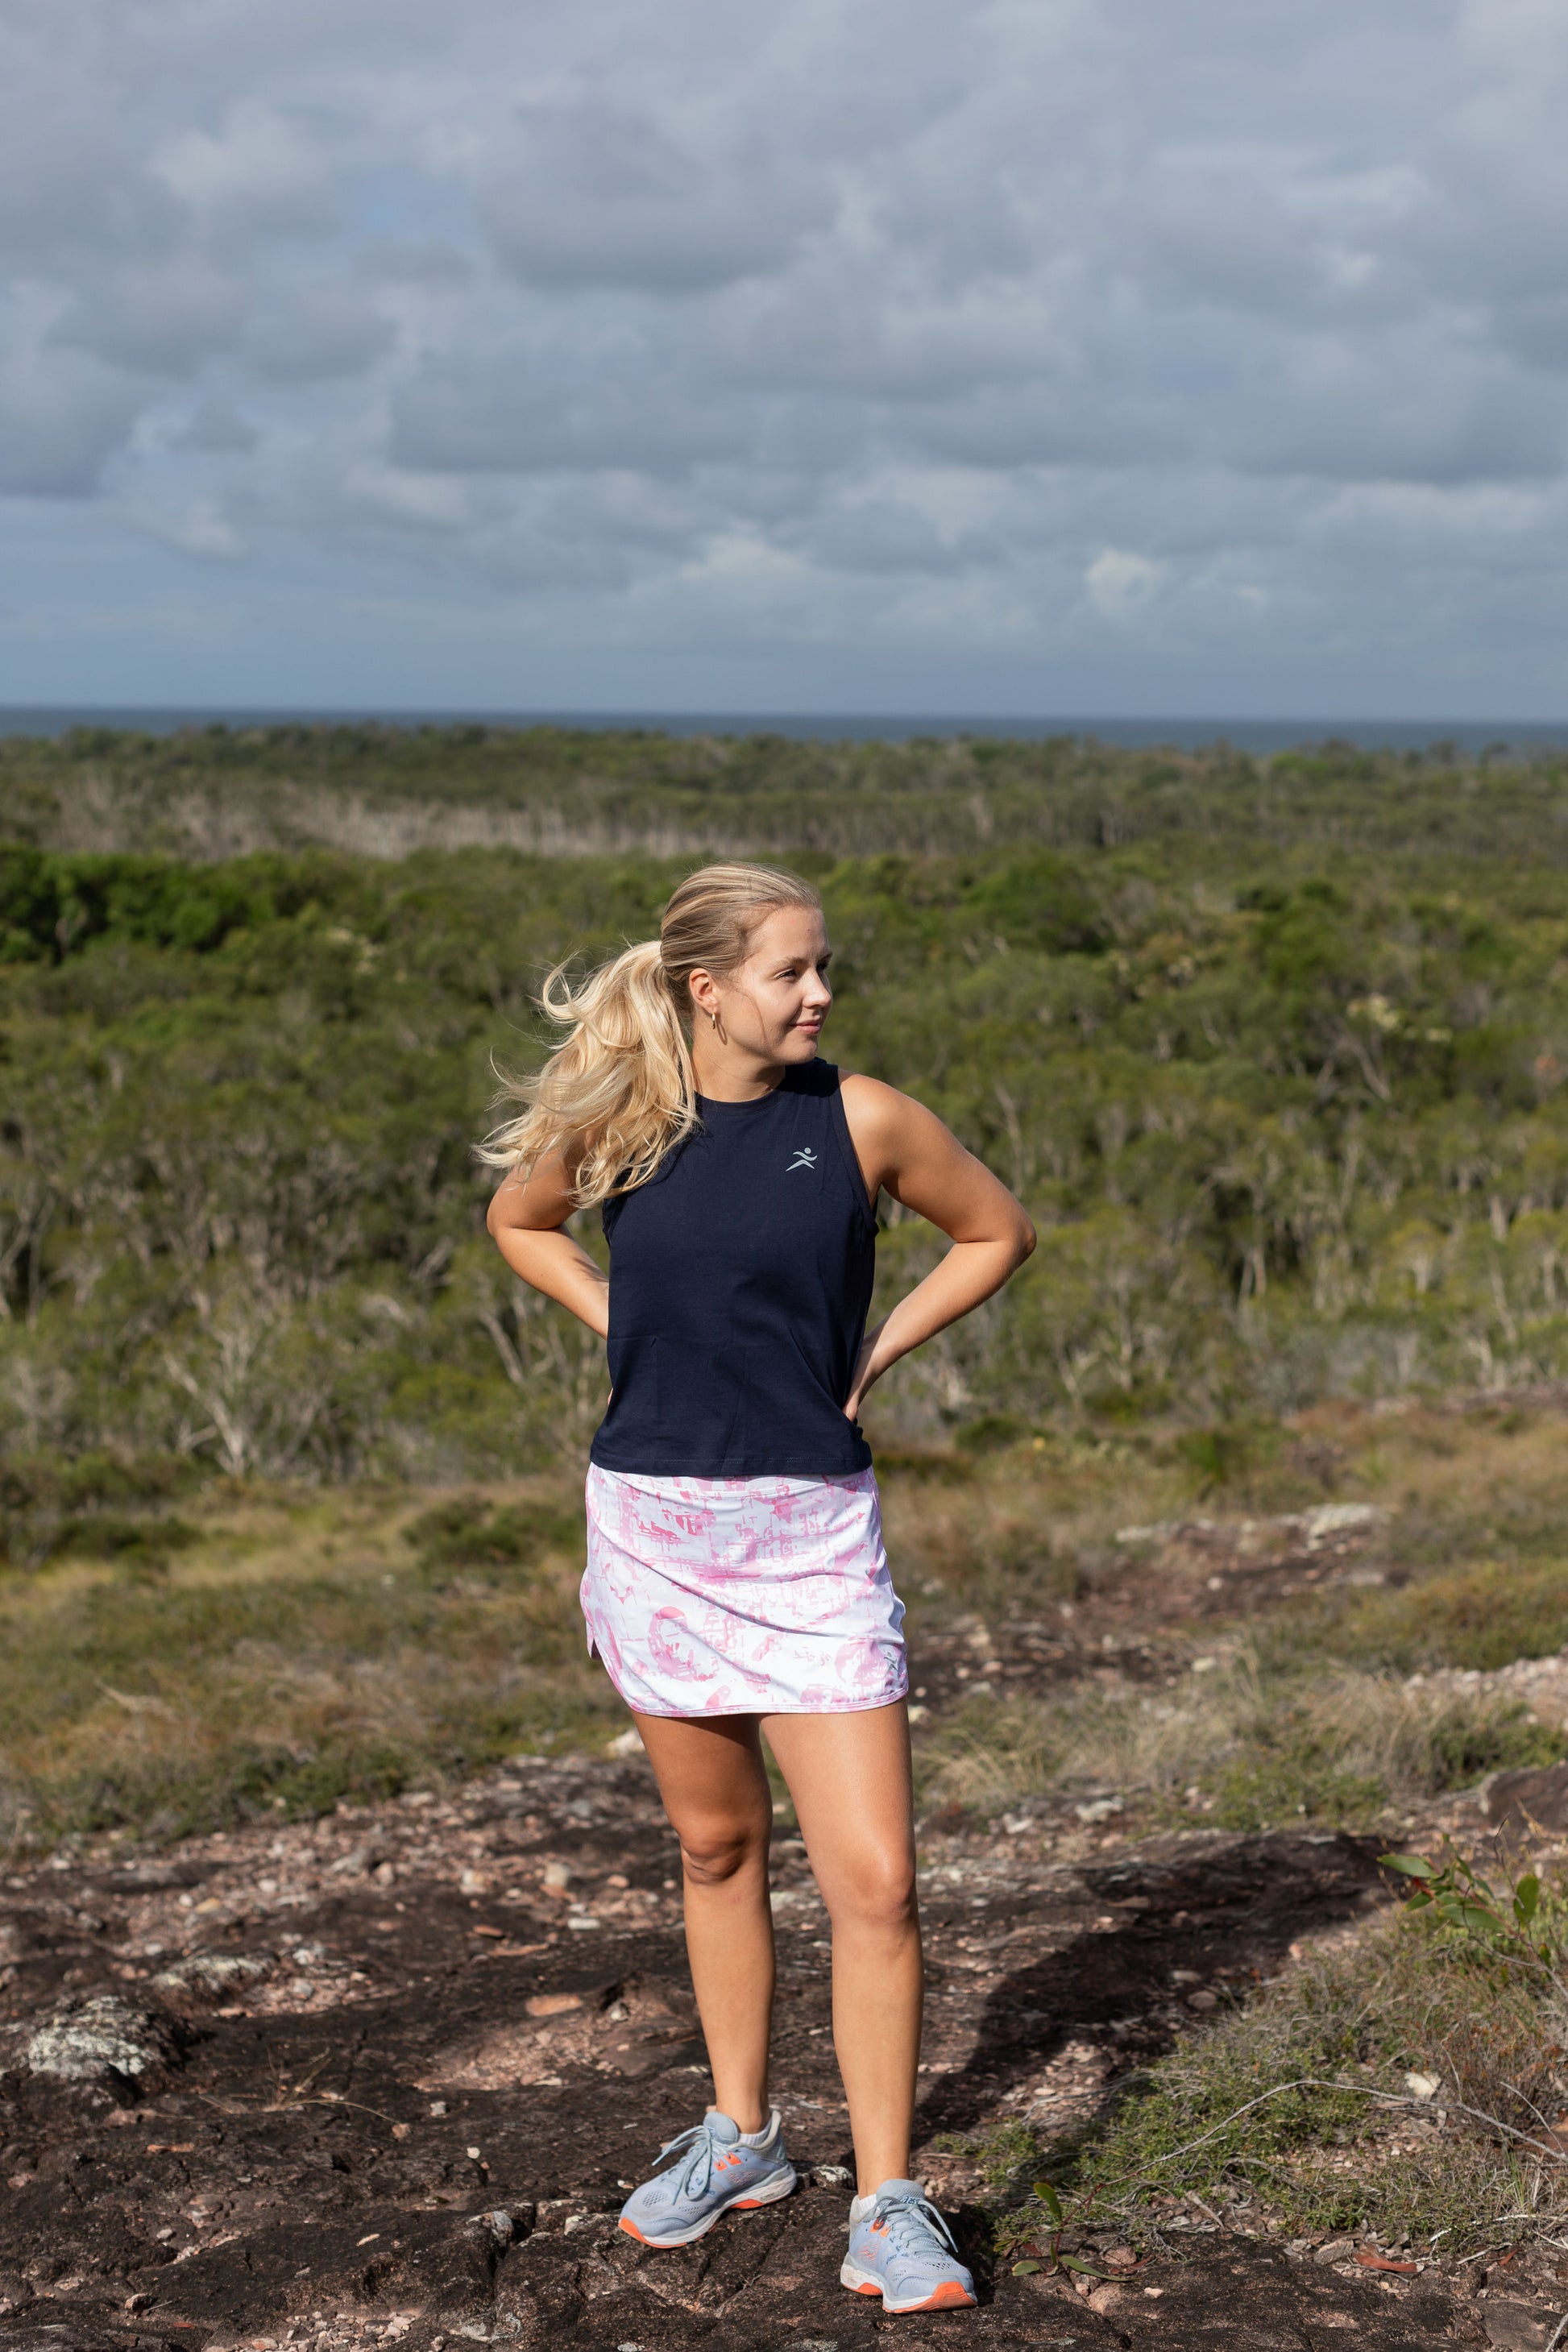 Gmaxx Skorts Julia skort is a beautiful soft pink and white print. Very Feminine. Undershorts with two pockets. Ideal for Golf, Pickleball, Tennis, Skort with pockets, suit tennis dress, tennis skirt pickleball, golf skort, Golf skirt